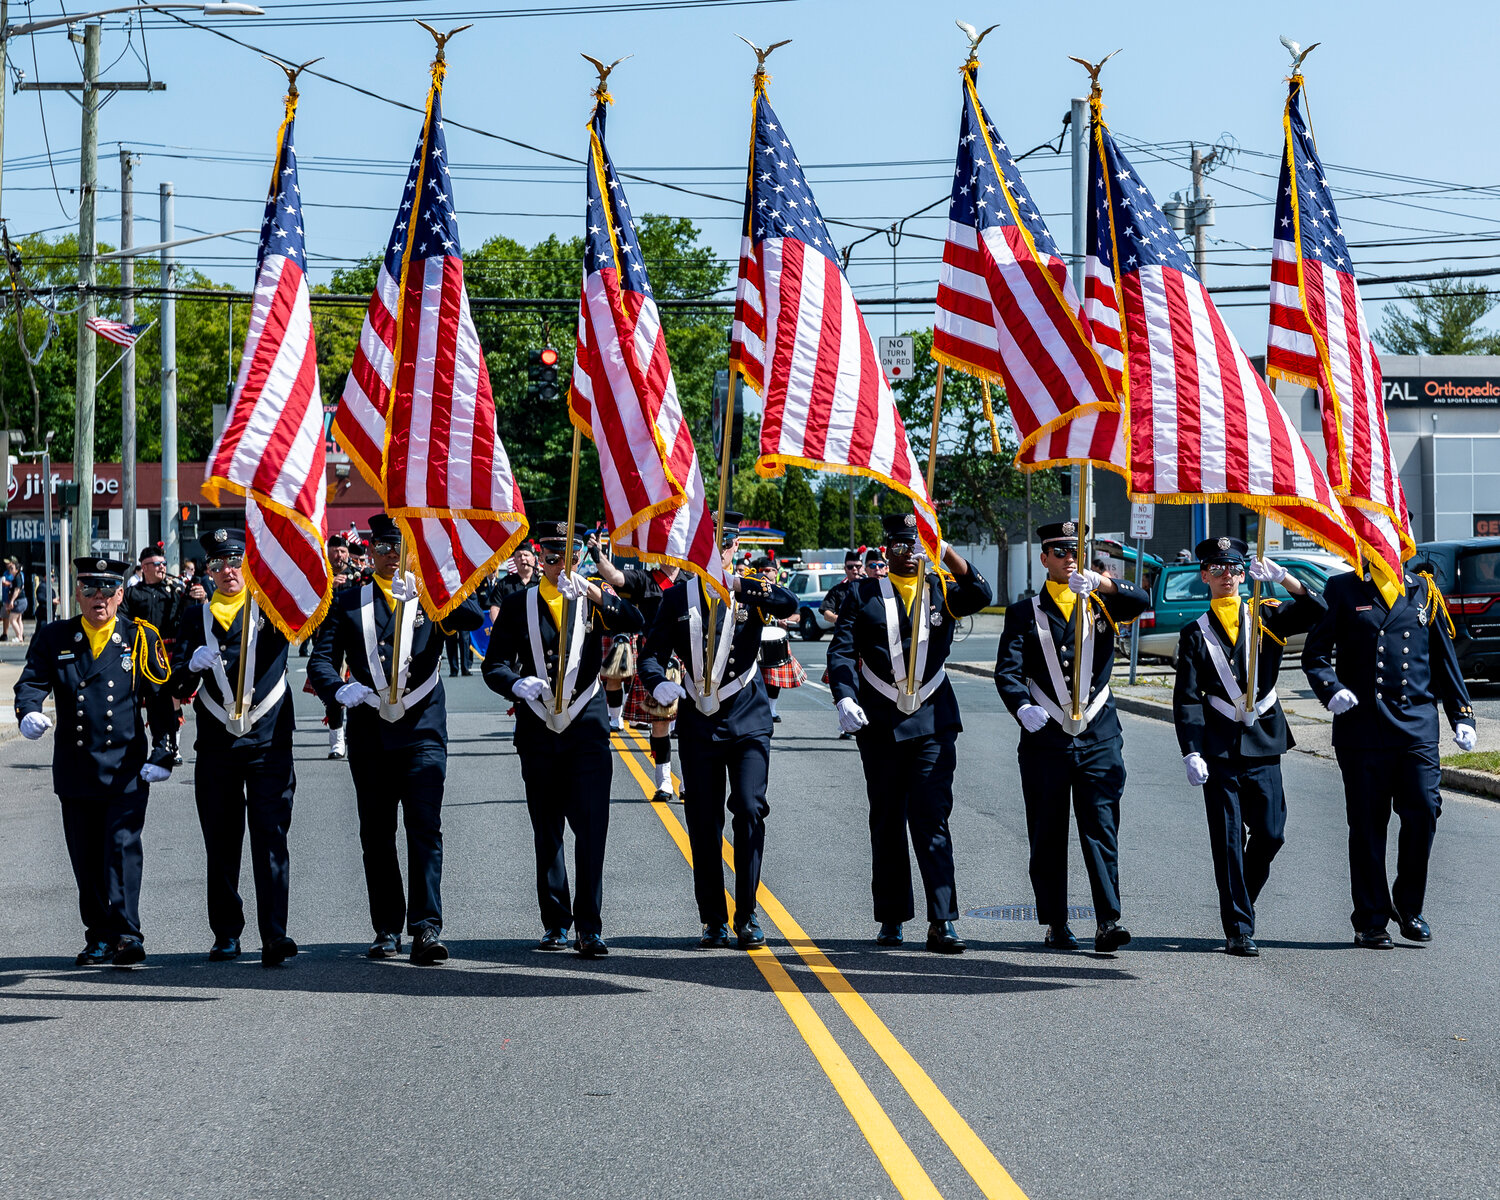 The East Meadow Fire Department was responsible for marching with the flags.